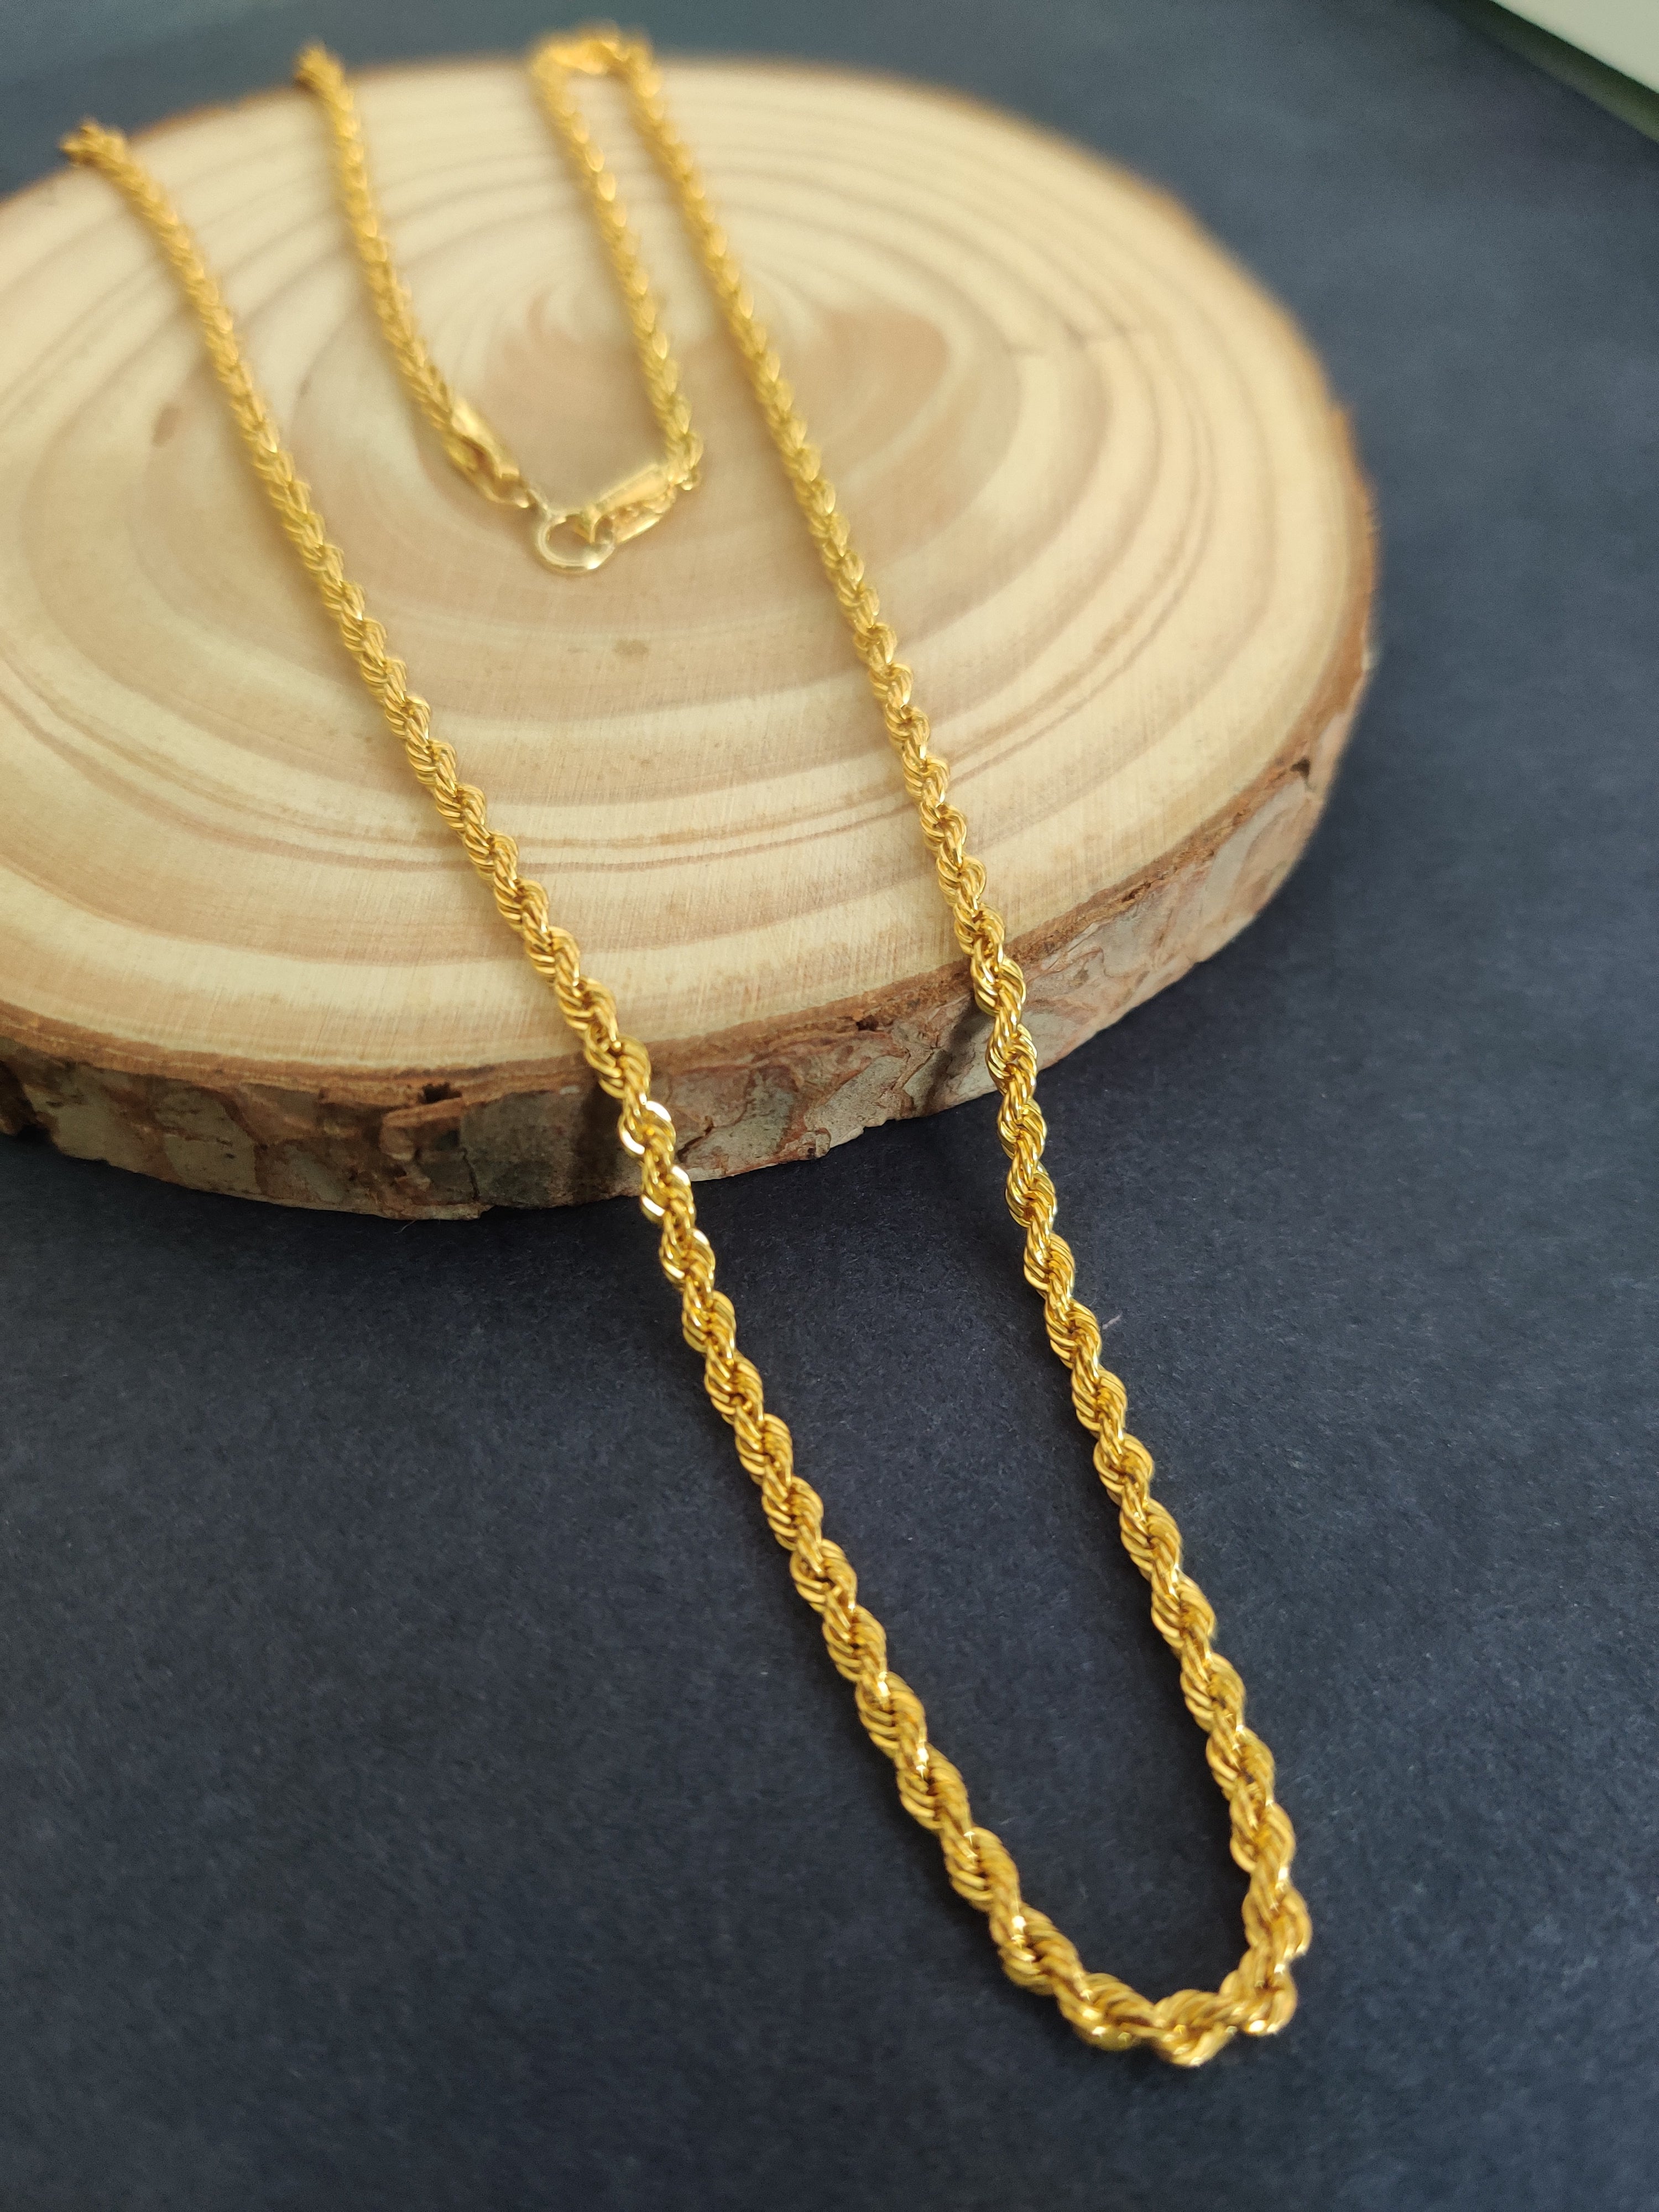 18k solid yellow gold Rope chain , 2 mm Rope chain, 18 inches real yellow gold rope Necklace